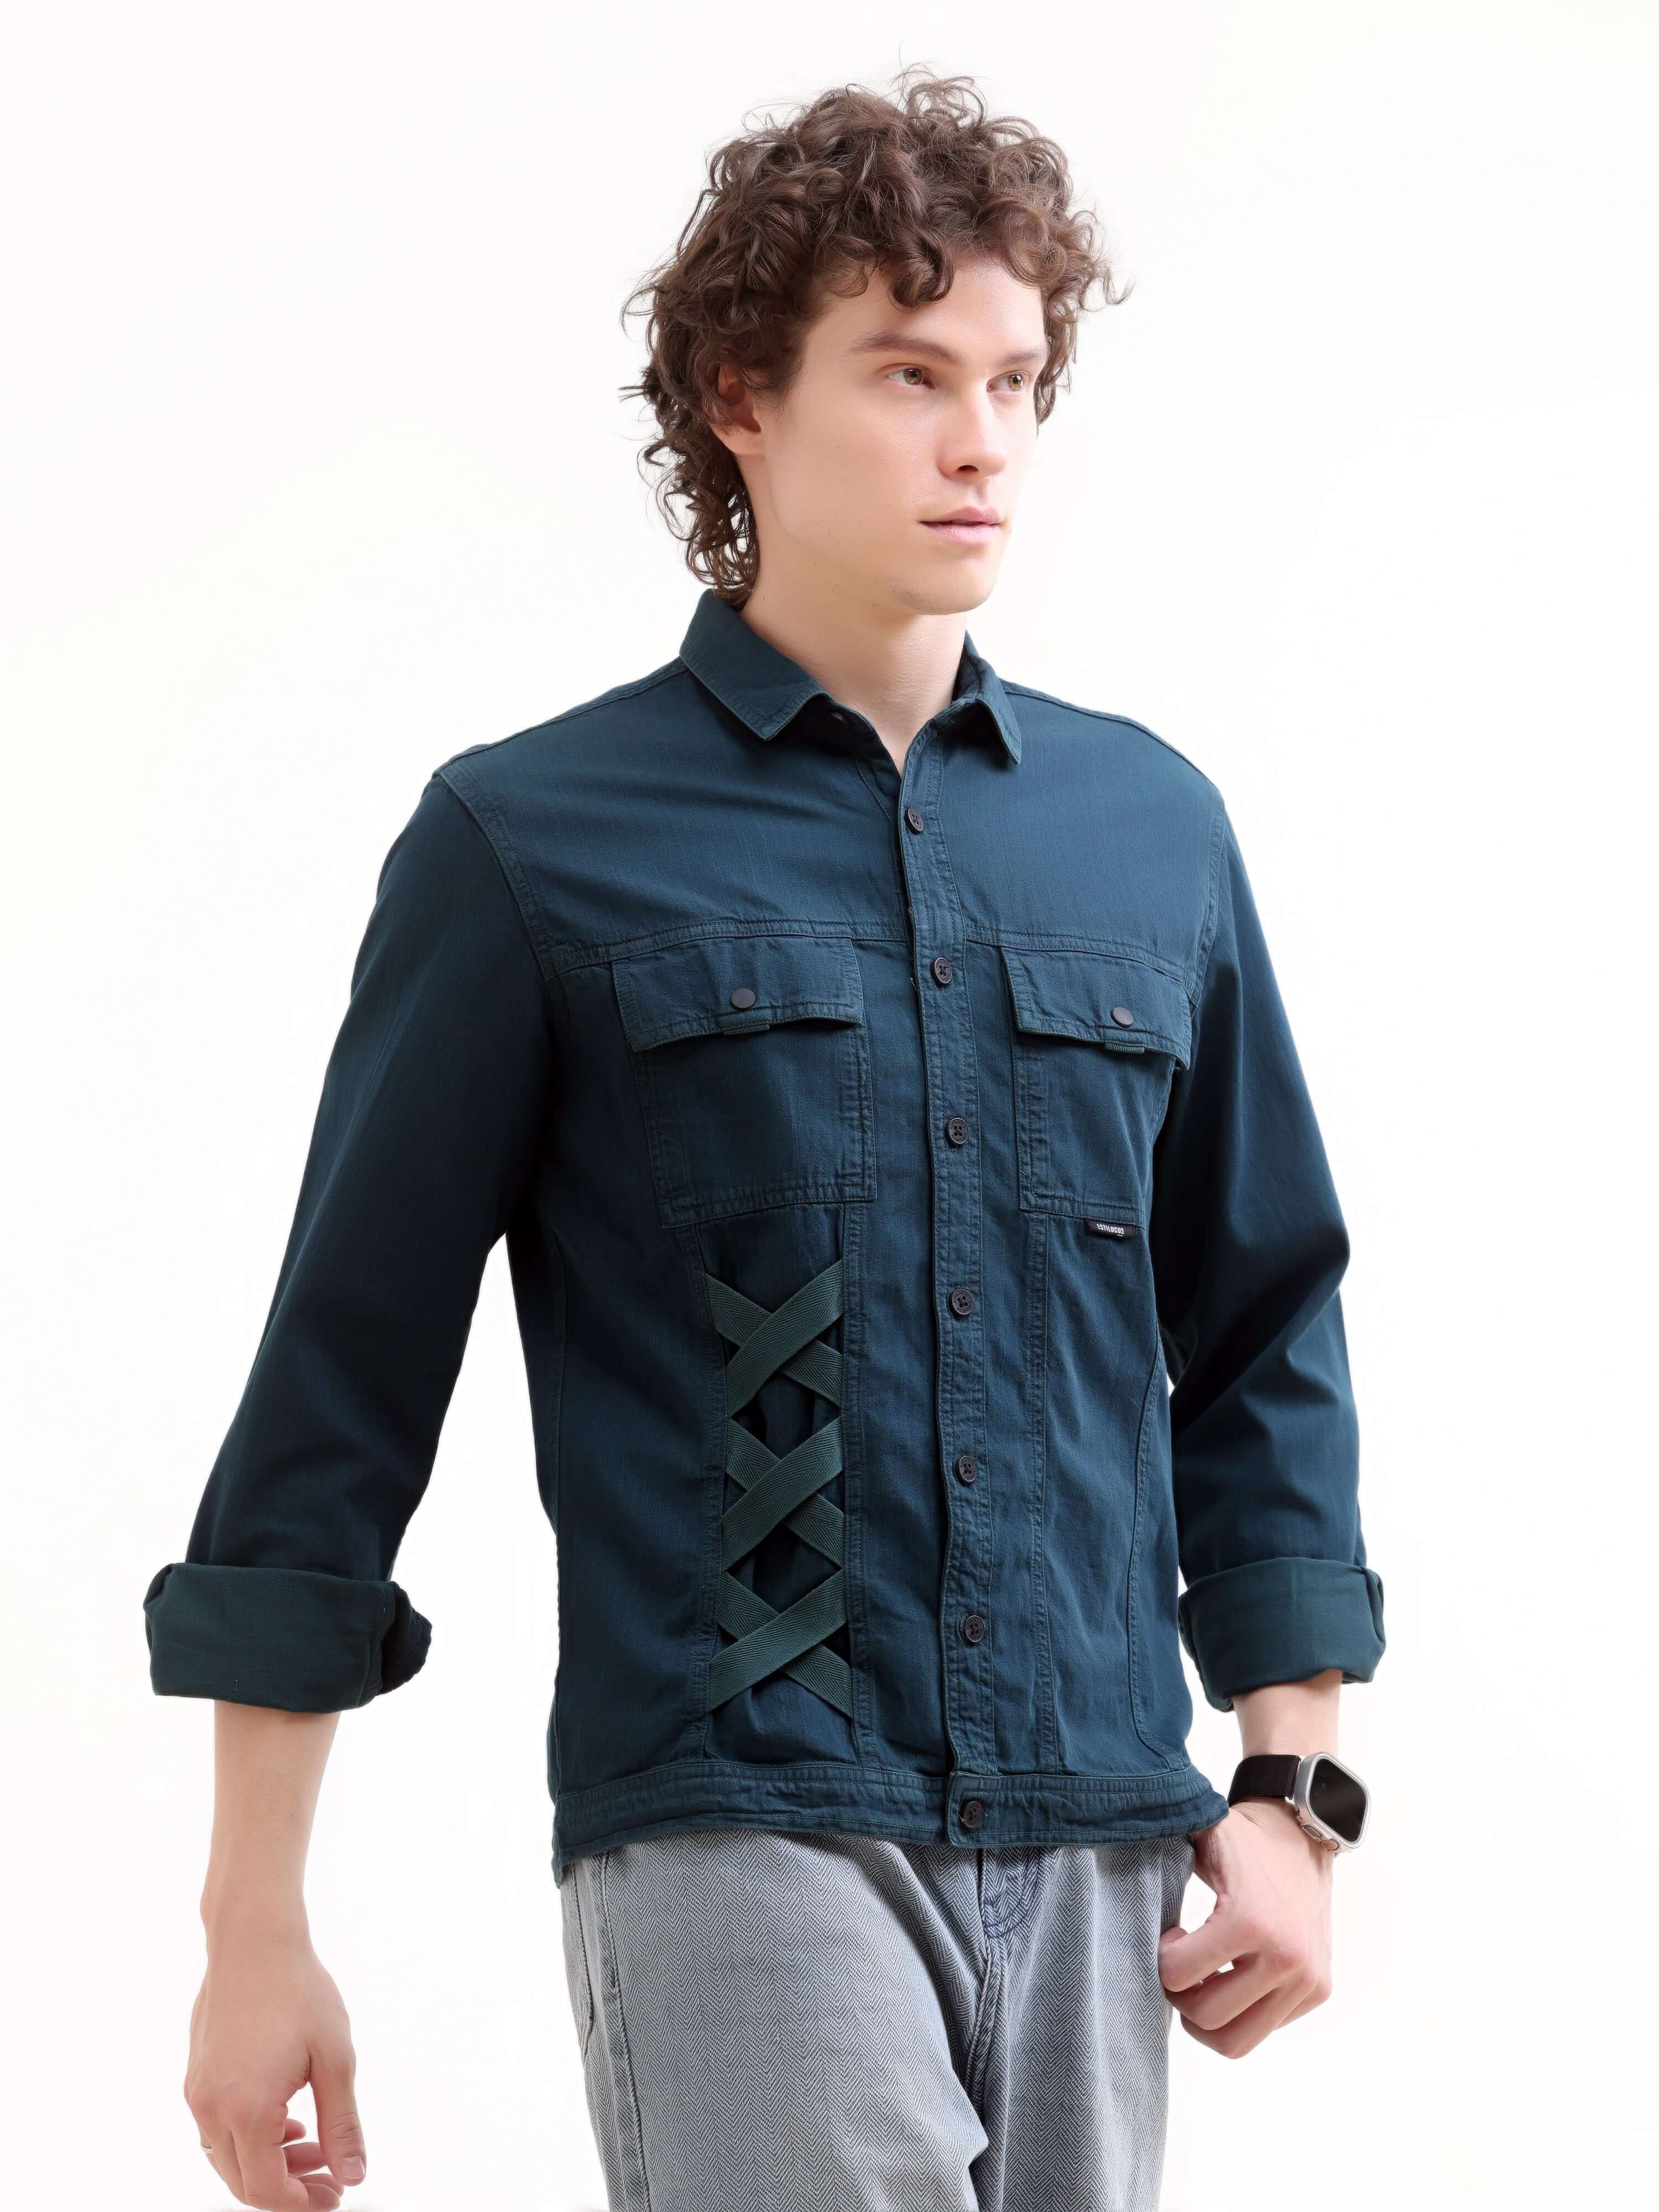 Men's Teal Denim Overshirt - New Color & Classic Fit shop online at Estilocus. Discover the Rubans teal overshirt: a fresh color twist on classic denim. Perfect for casual outings & stylish layering. Shop now for comfort & durability!